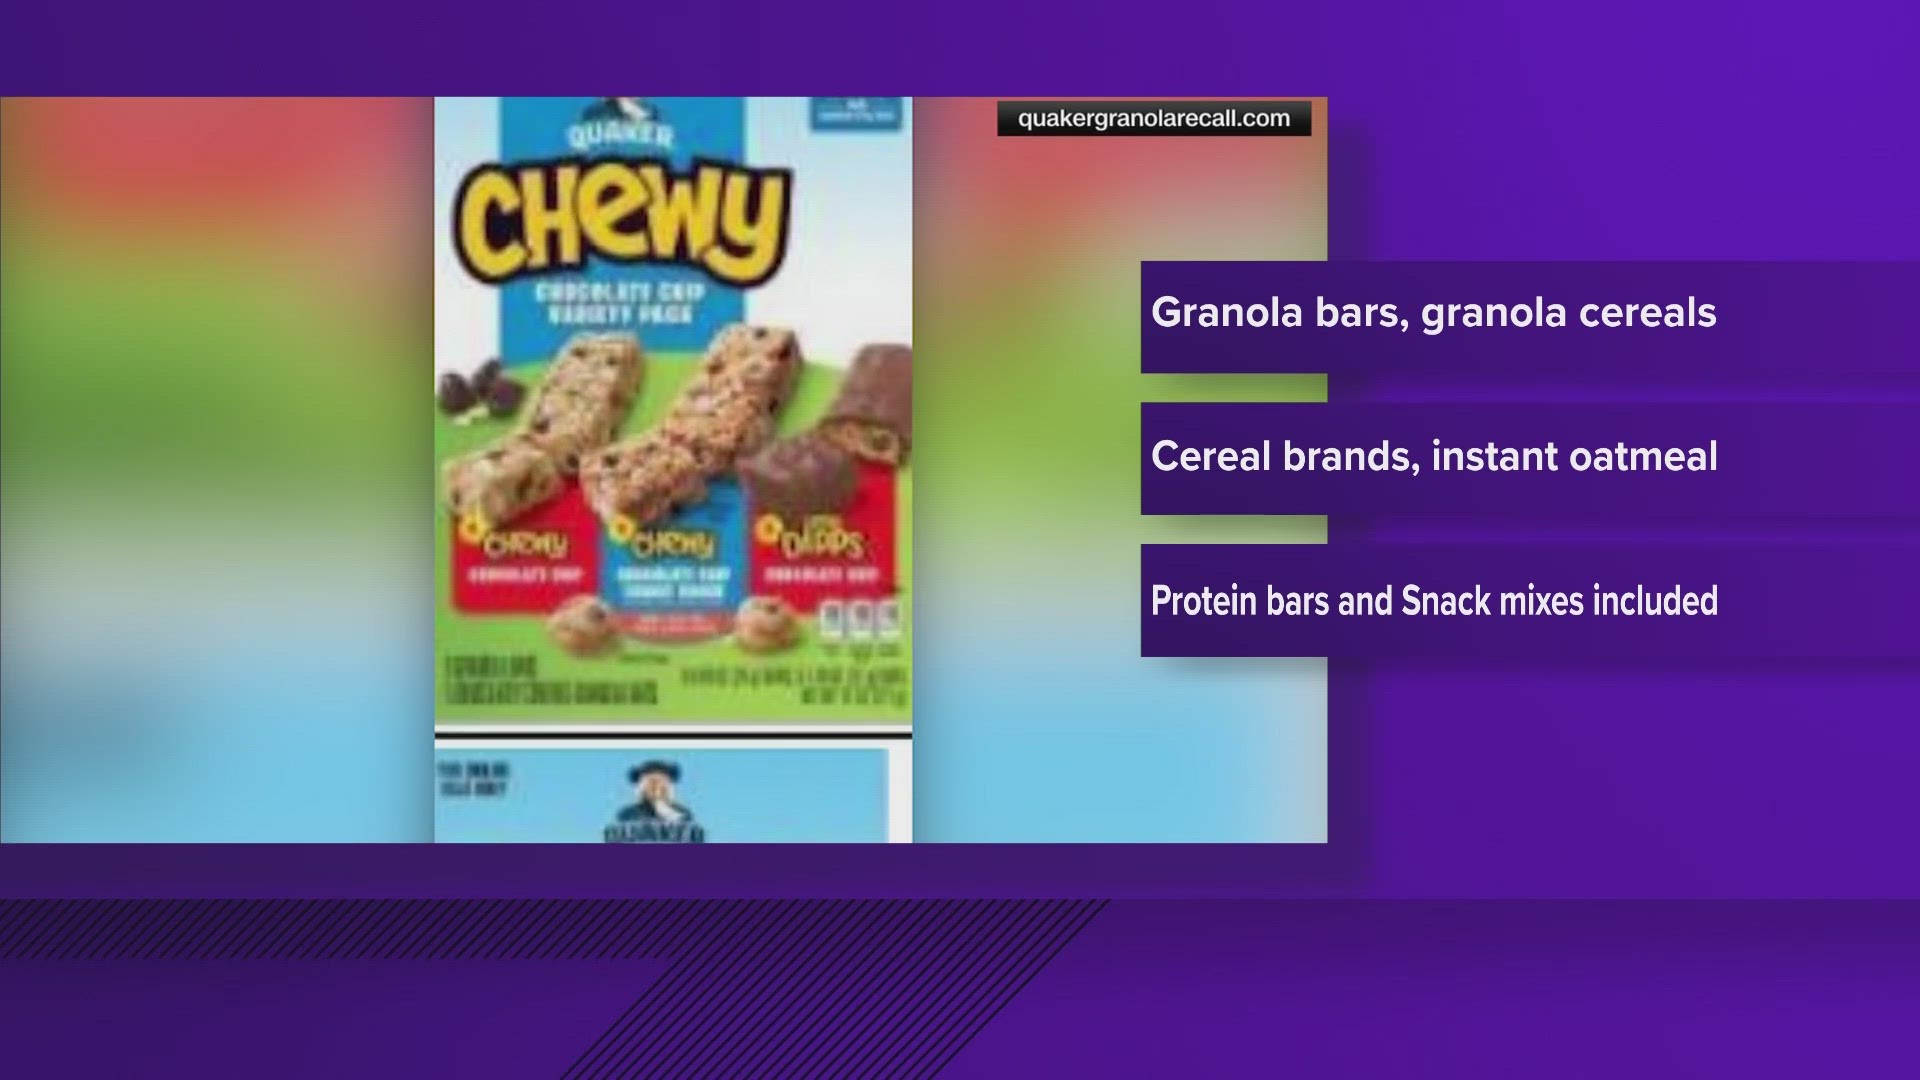 Now the company is adding more cereal brands, cereal bars, instant oatmeal, protein bars, and snack mixes to the list.